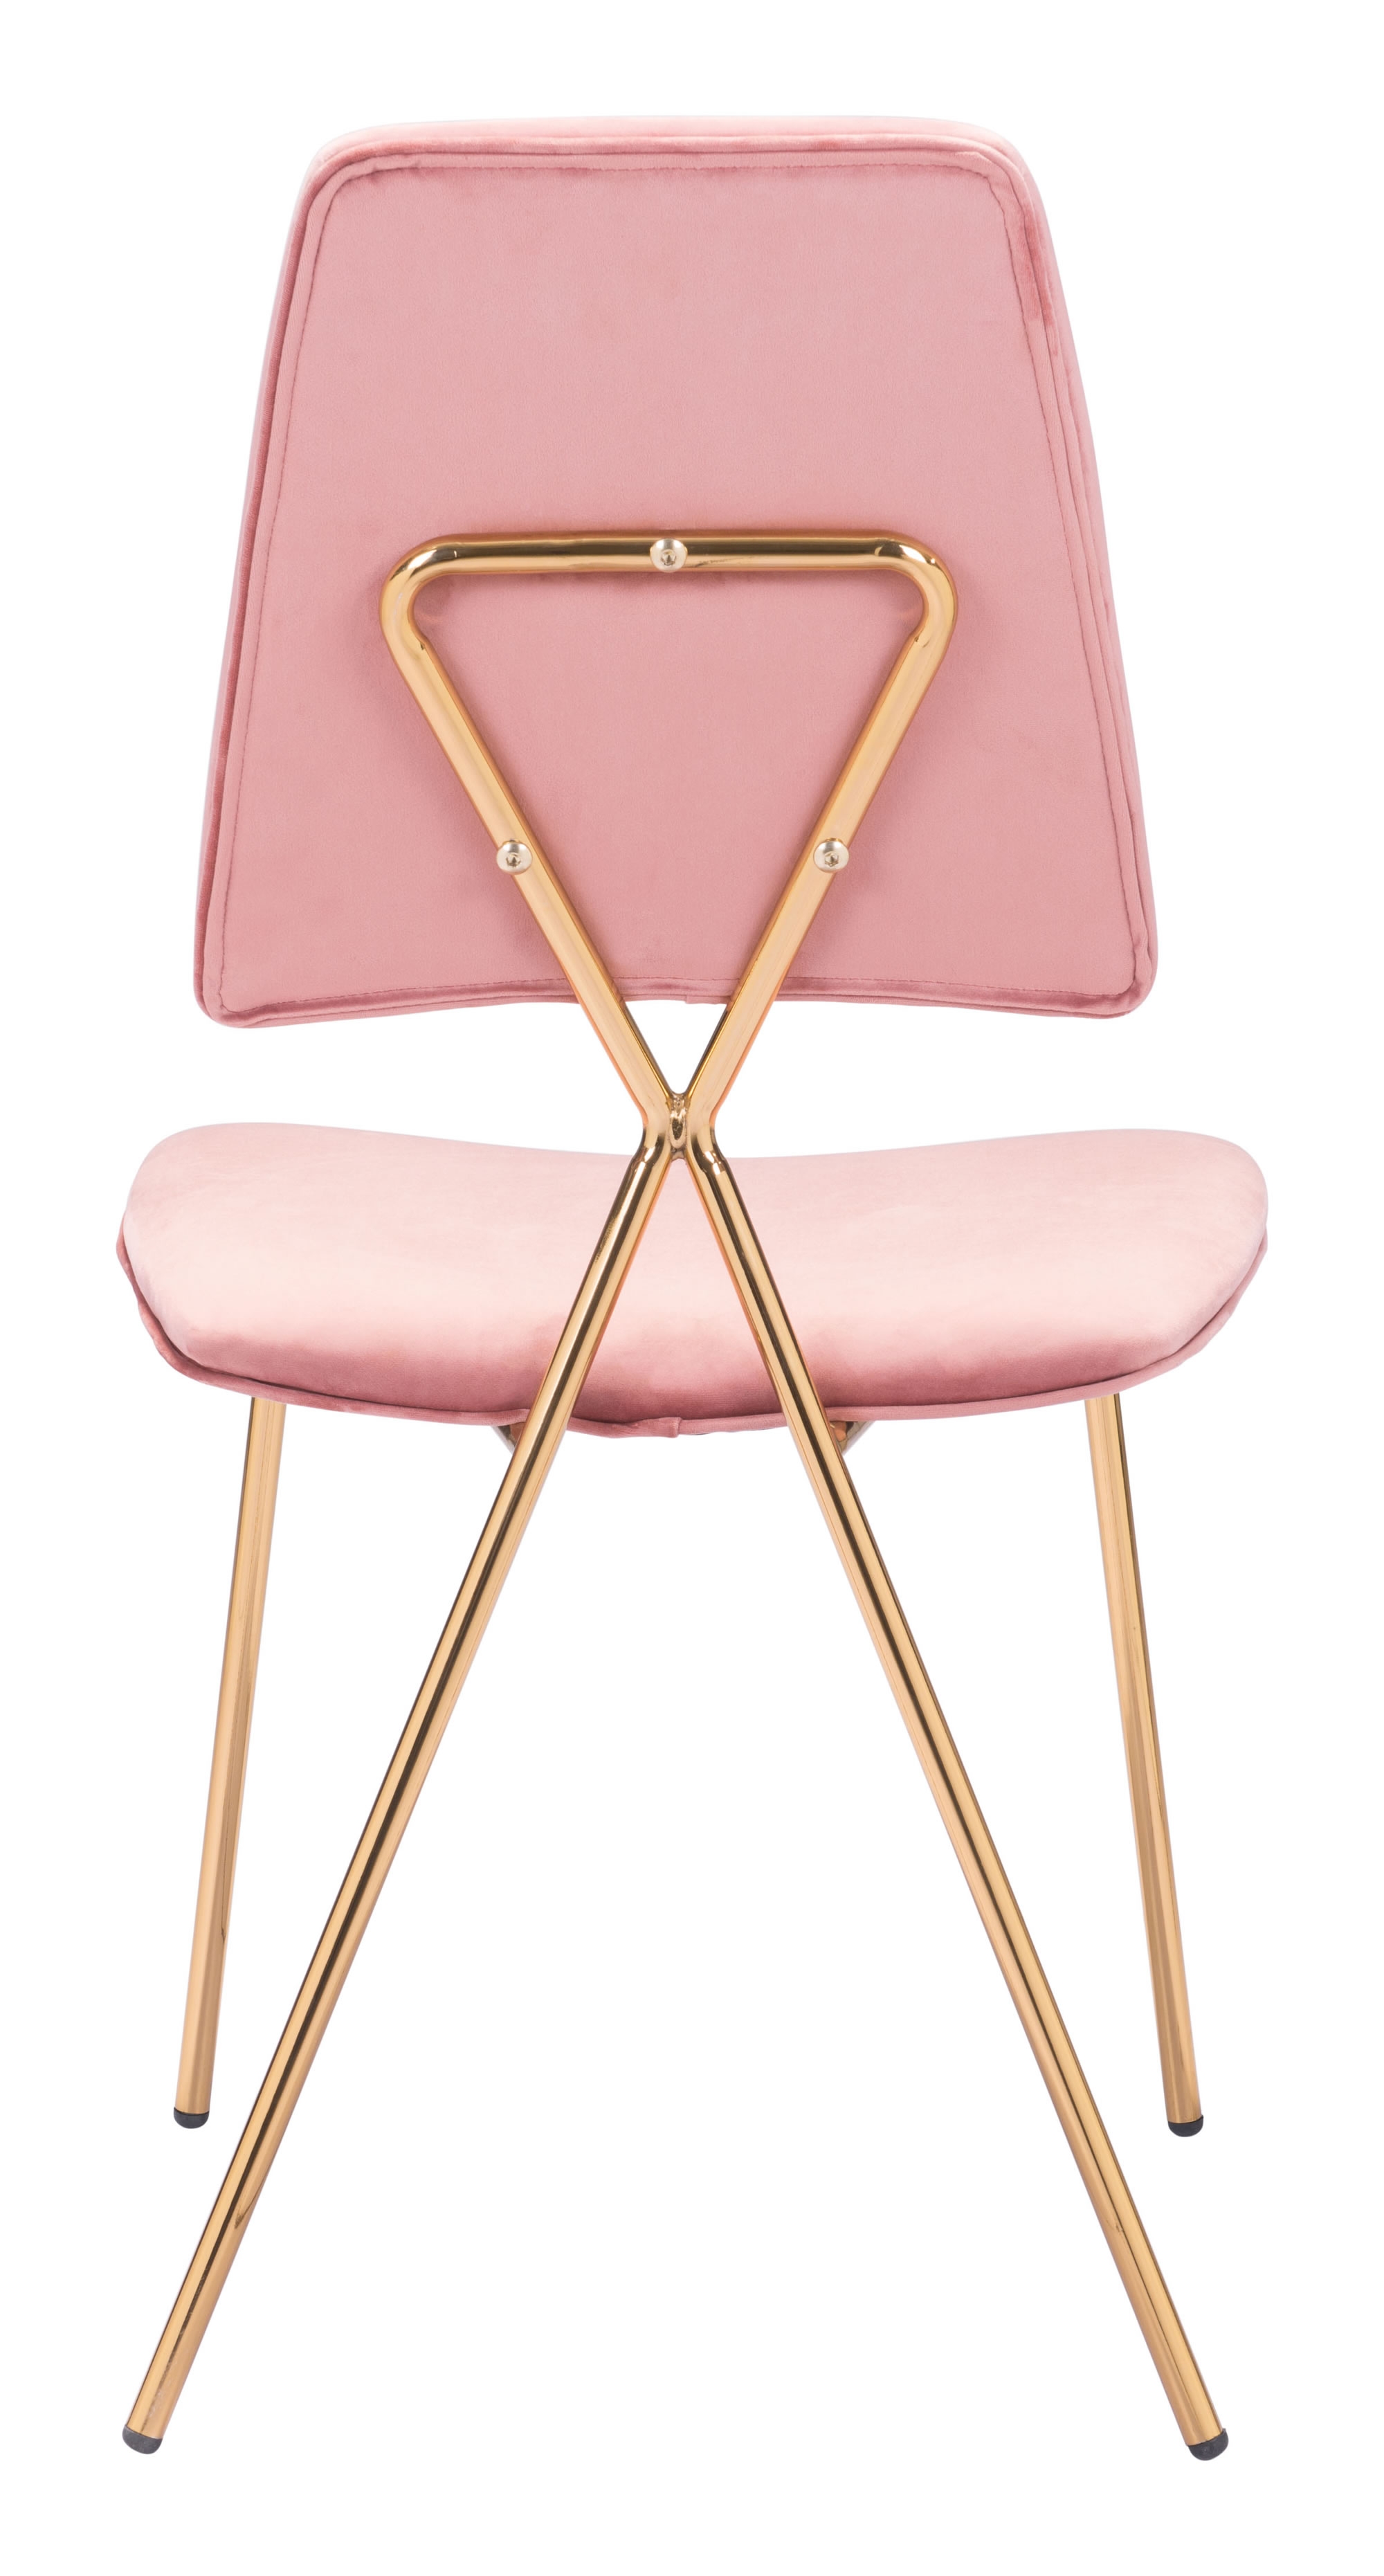 Chloe Dining Chair Pink & Gold (Set of 2) - Image 3